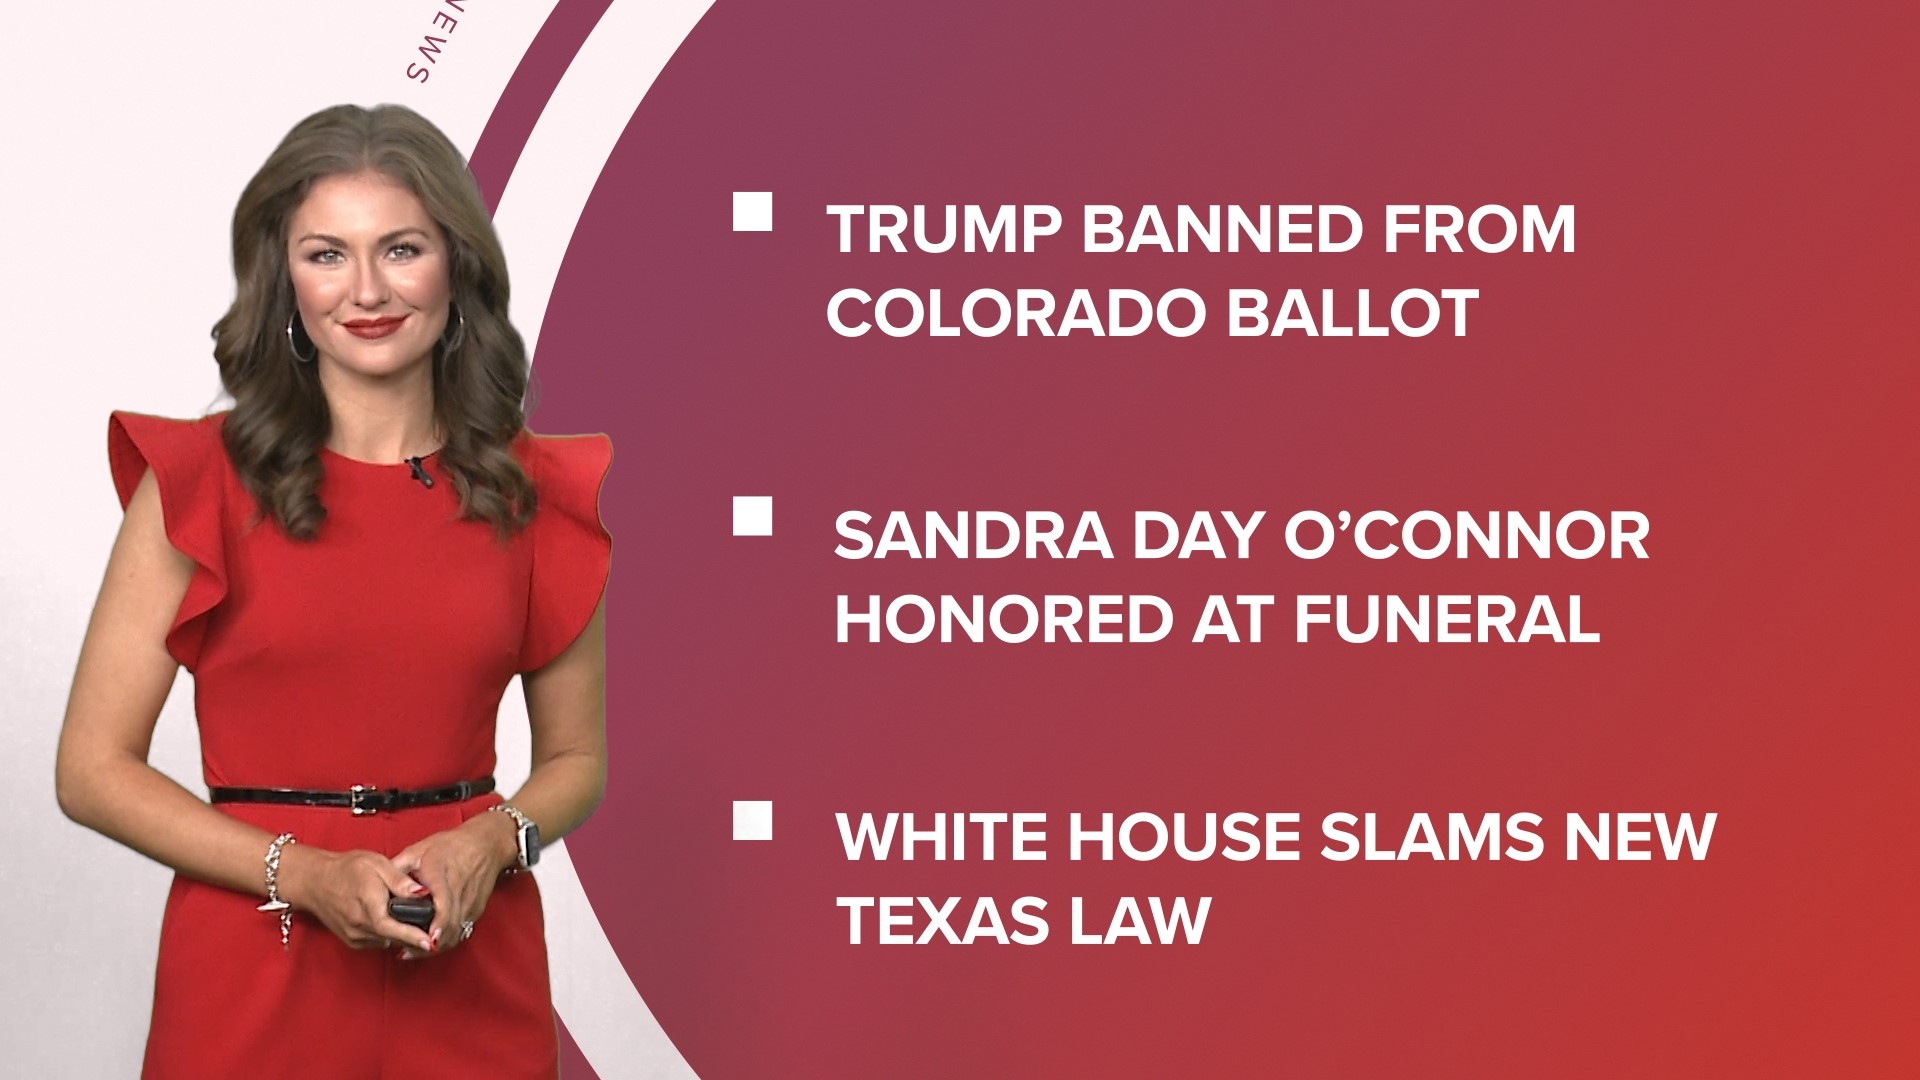 A look at what is happening in the news from the Colorado Supreme Court disqualifying Donald Trump from the 2024 primary ballot to Sandra Day O'Connor laid to rest.